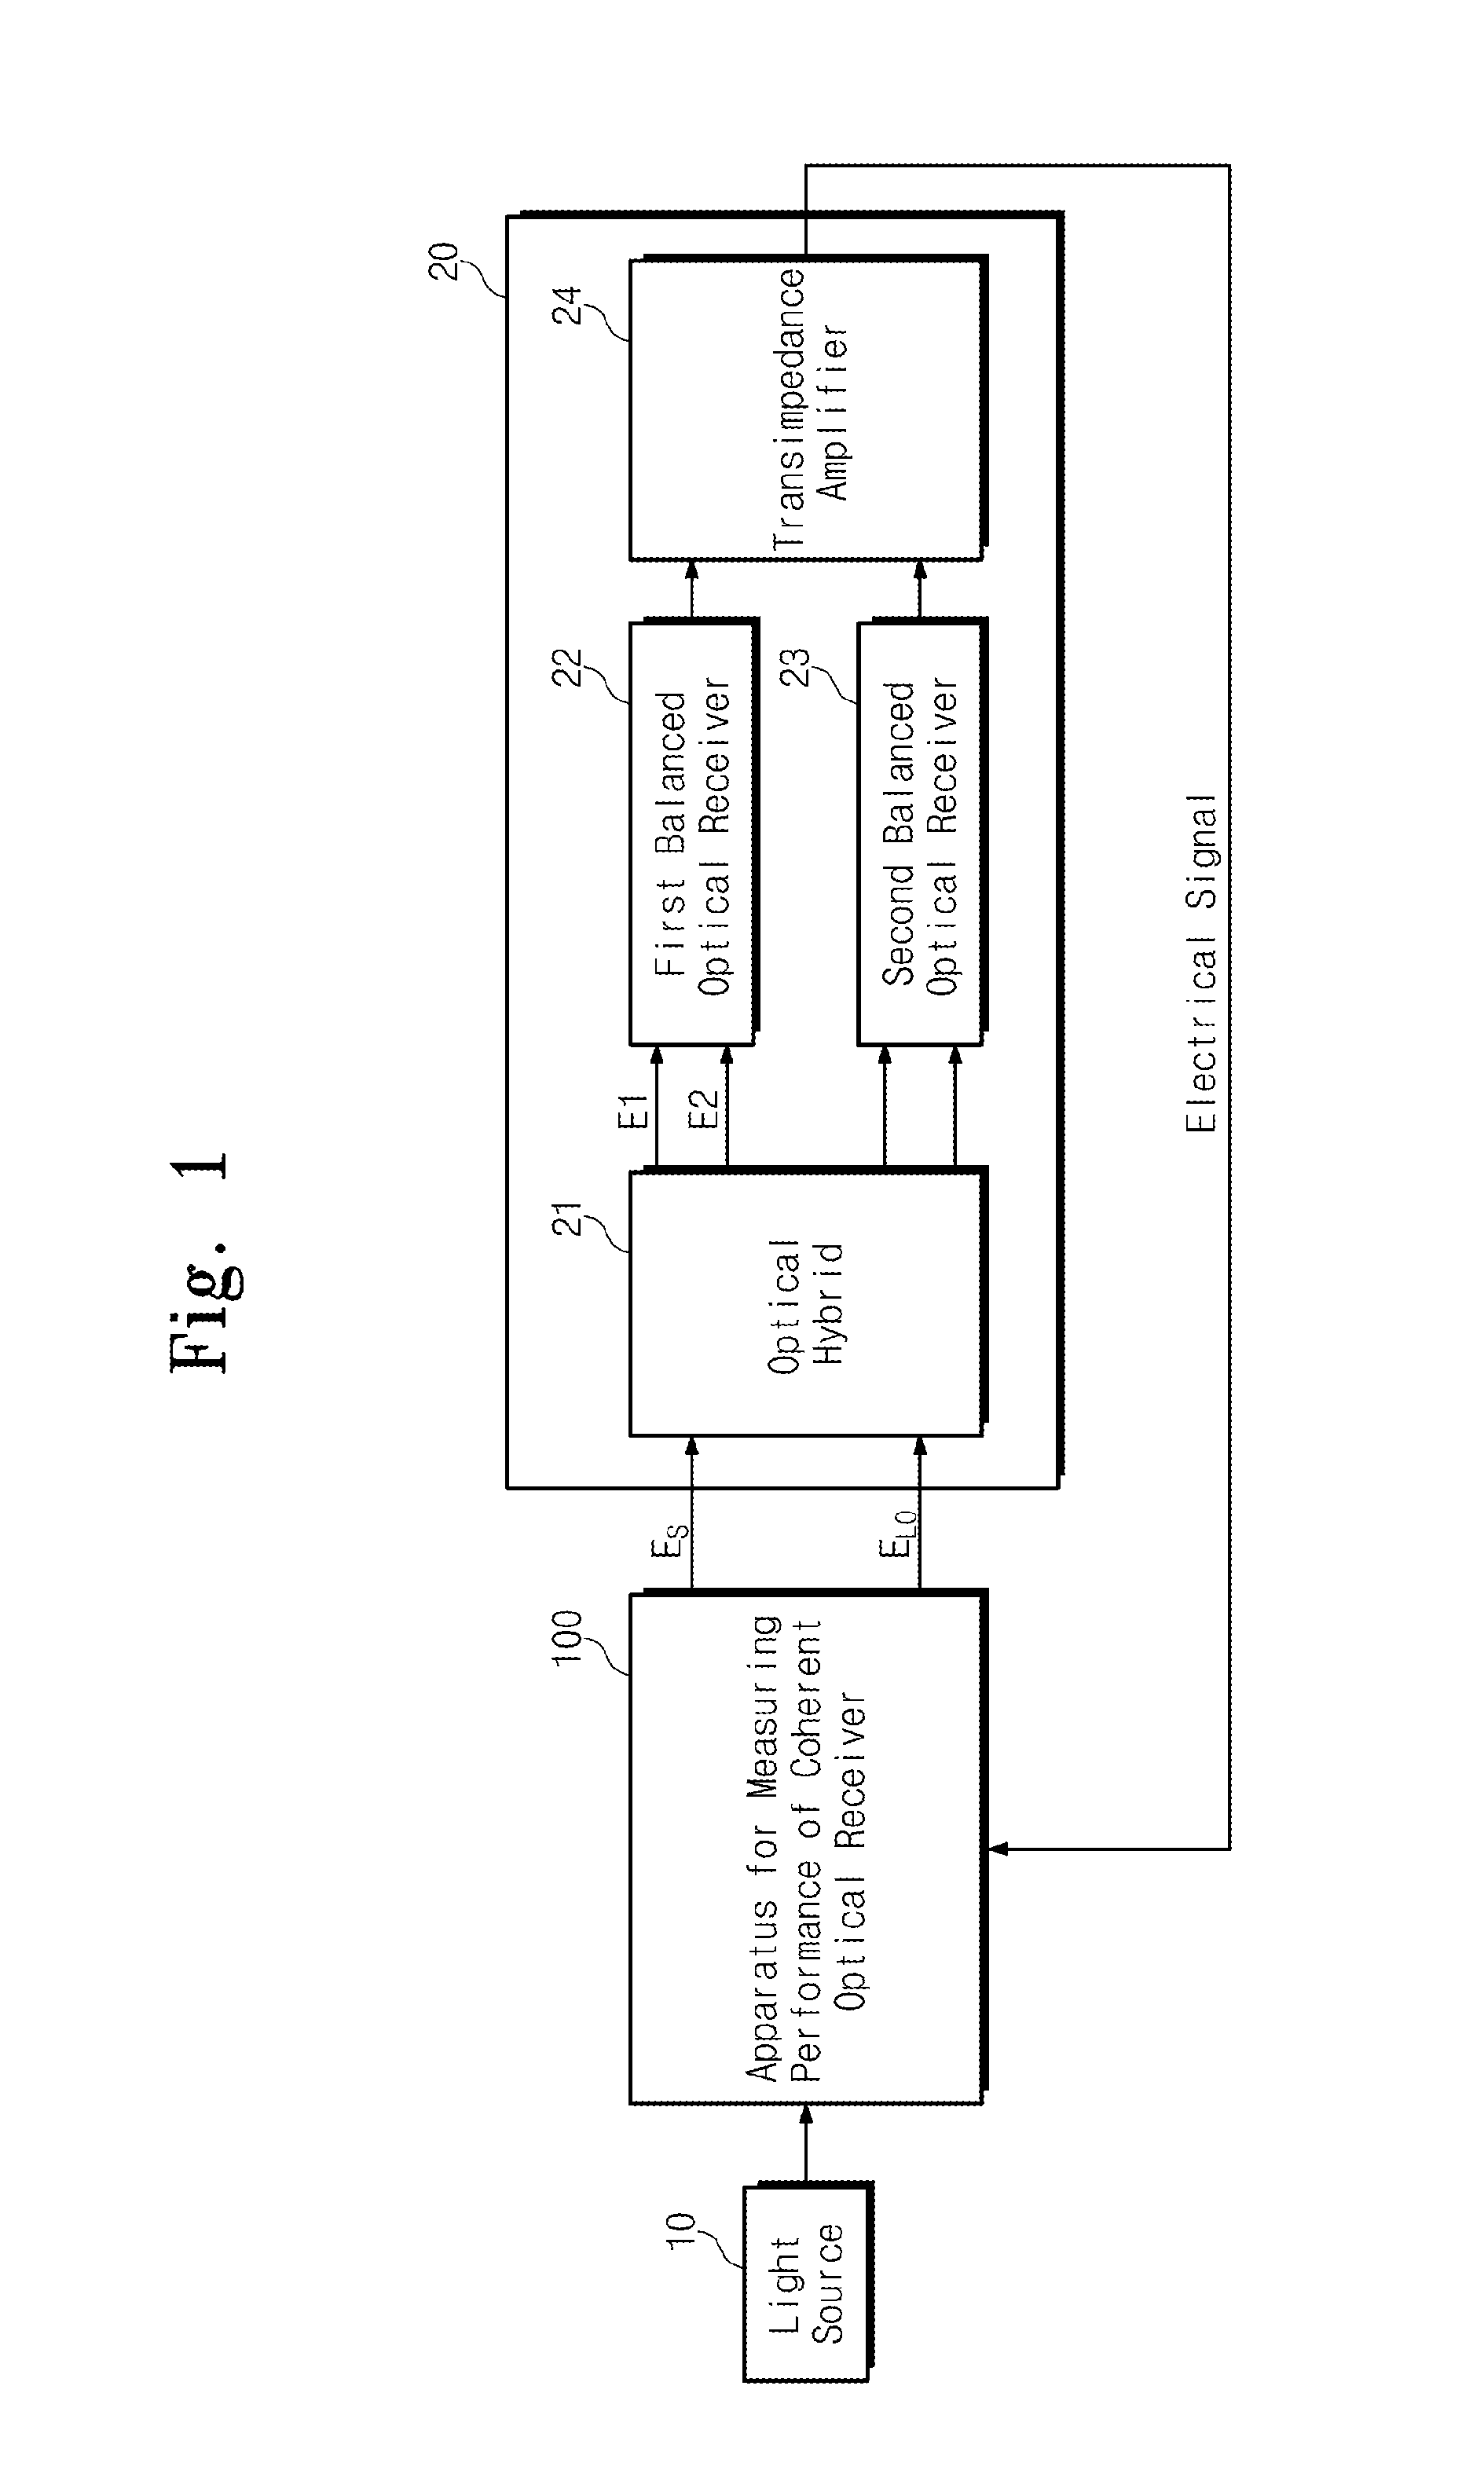 Apparatus for measuring performance of coherent optical receiver